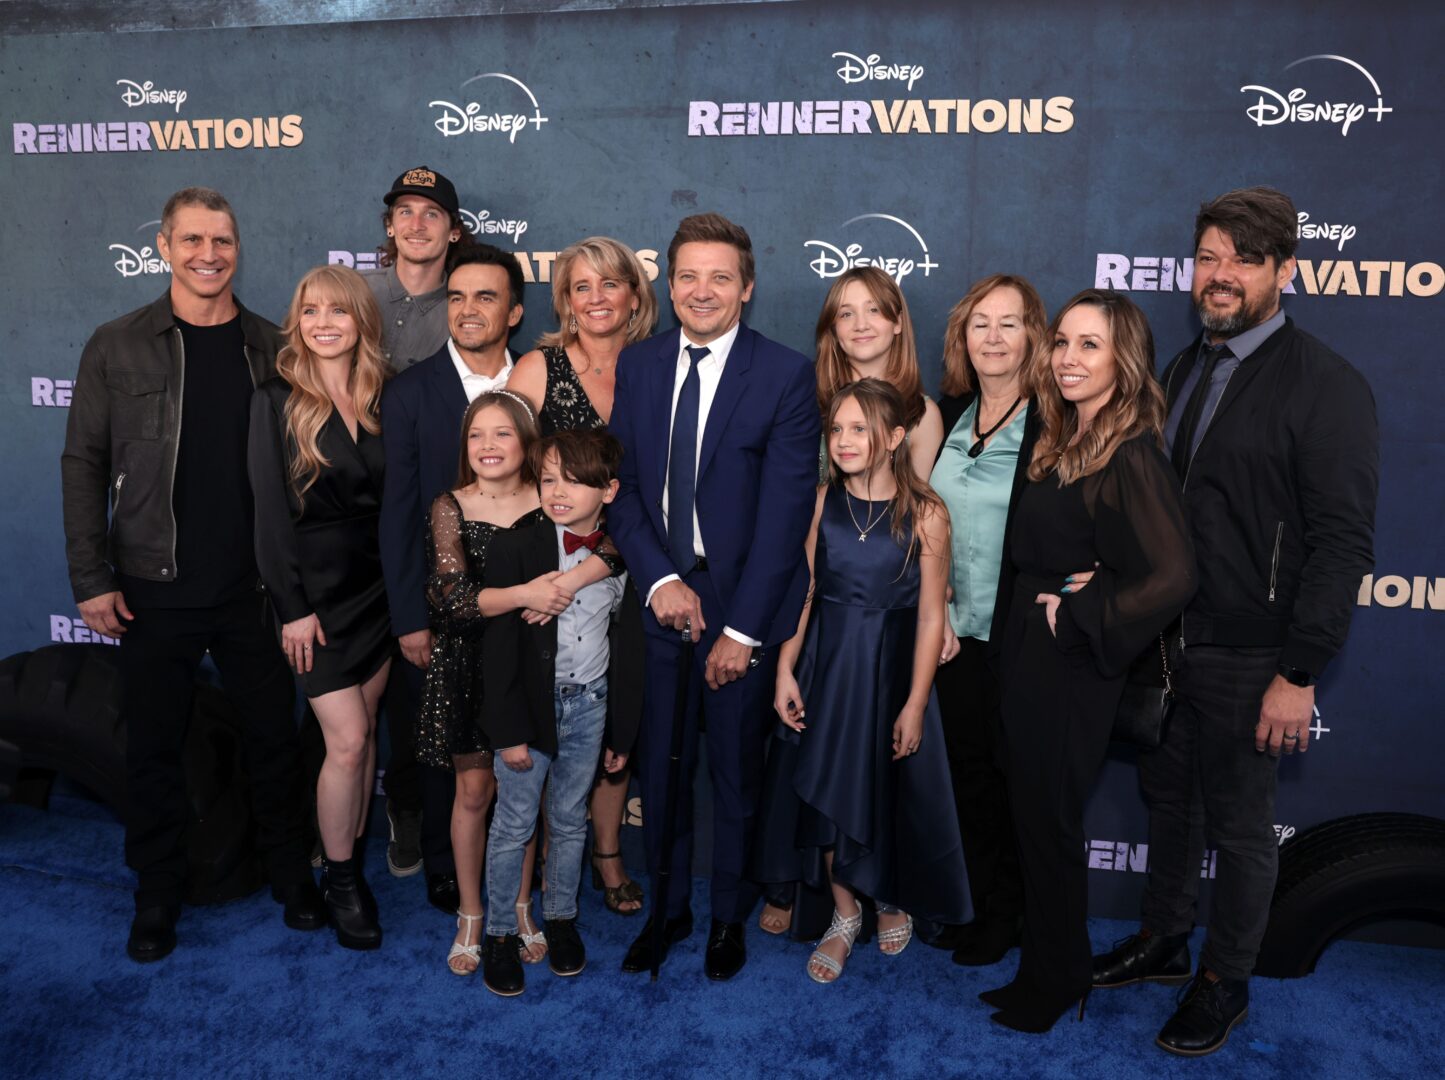 Jeremy Renner Walks the Red Carpet for “RENNERVATIONS” Since Snow Plow Accident